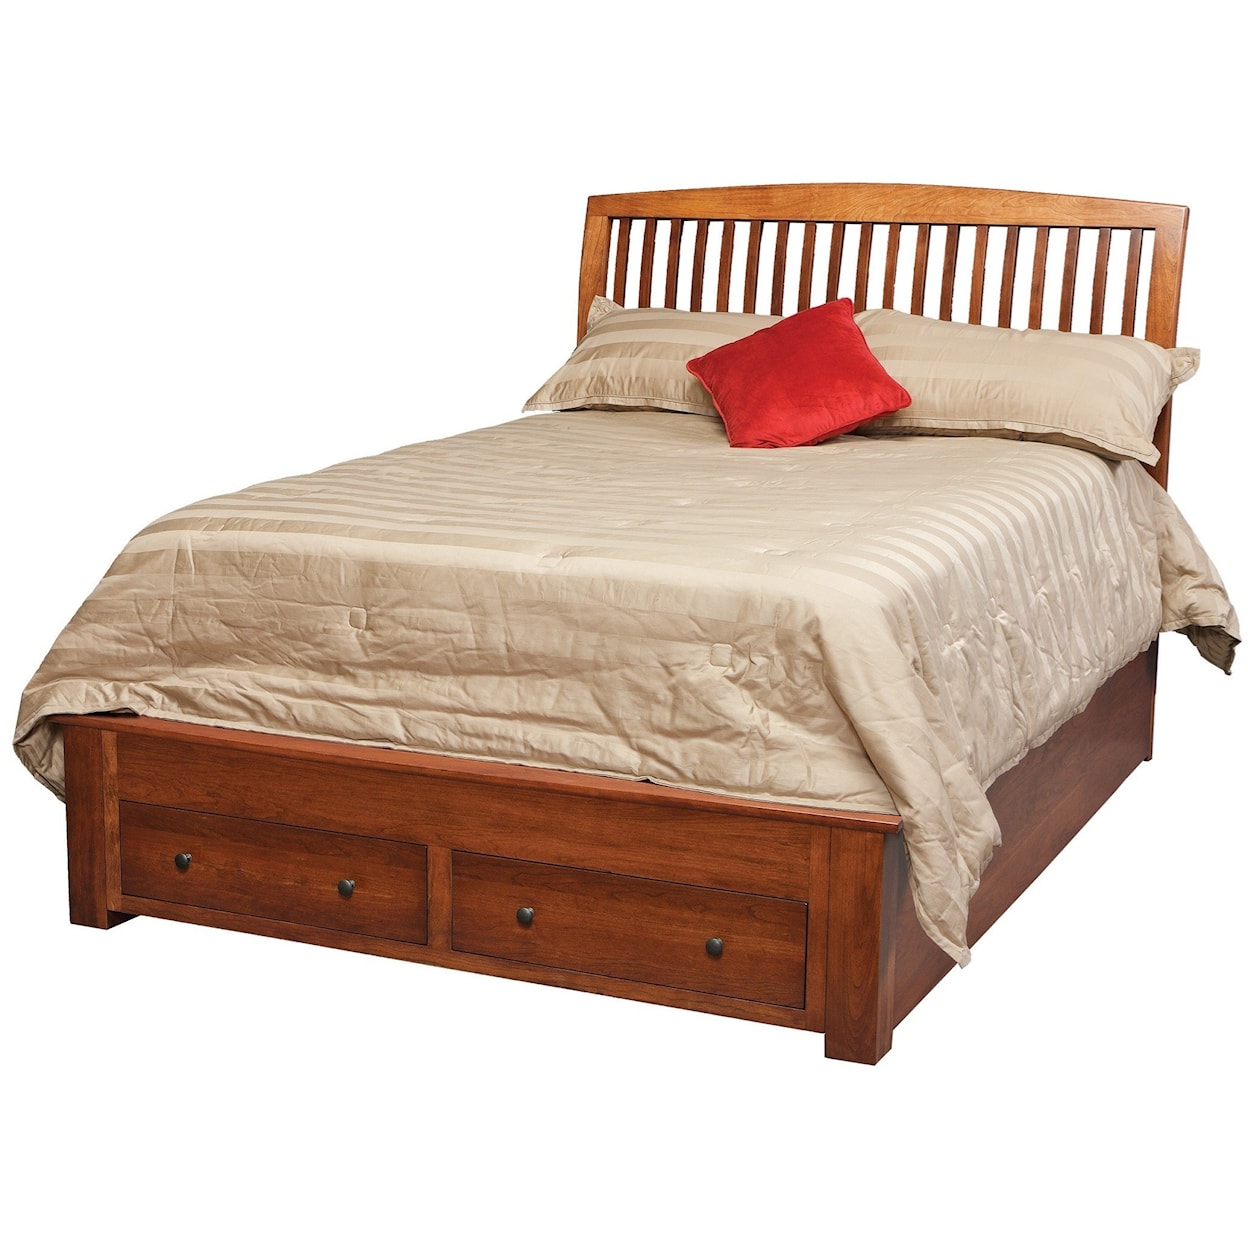 Daniels Amish Holmes Queen Pedestal Bed with 2 Footboard Drawers